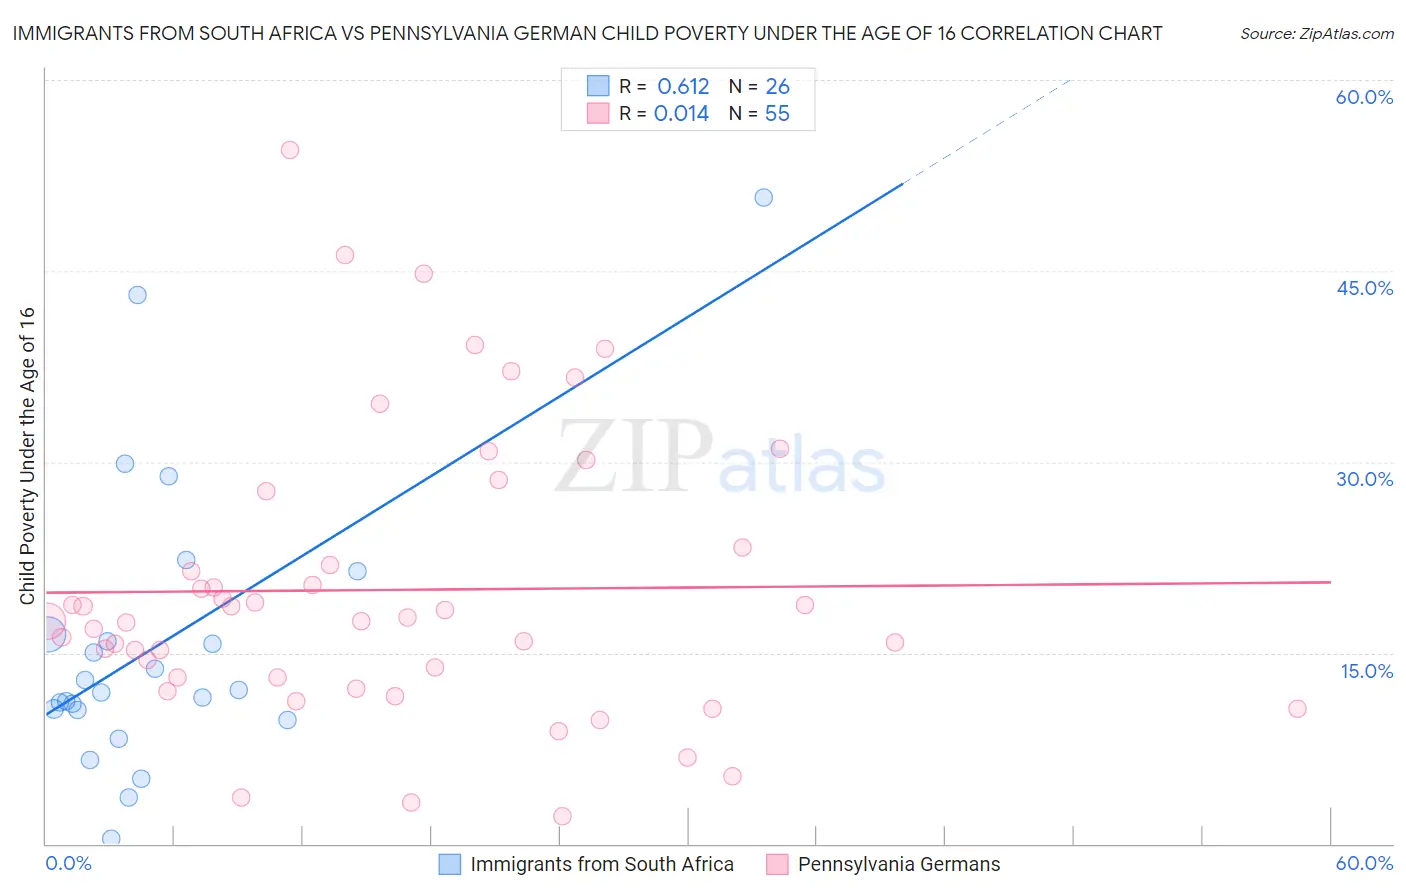 Immigrants from South Africa vs Pennsylvania German Child Poverty Under the Age of 16